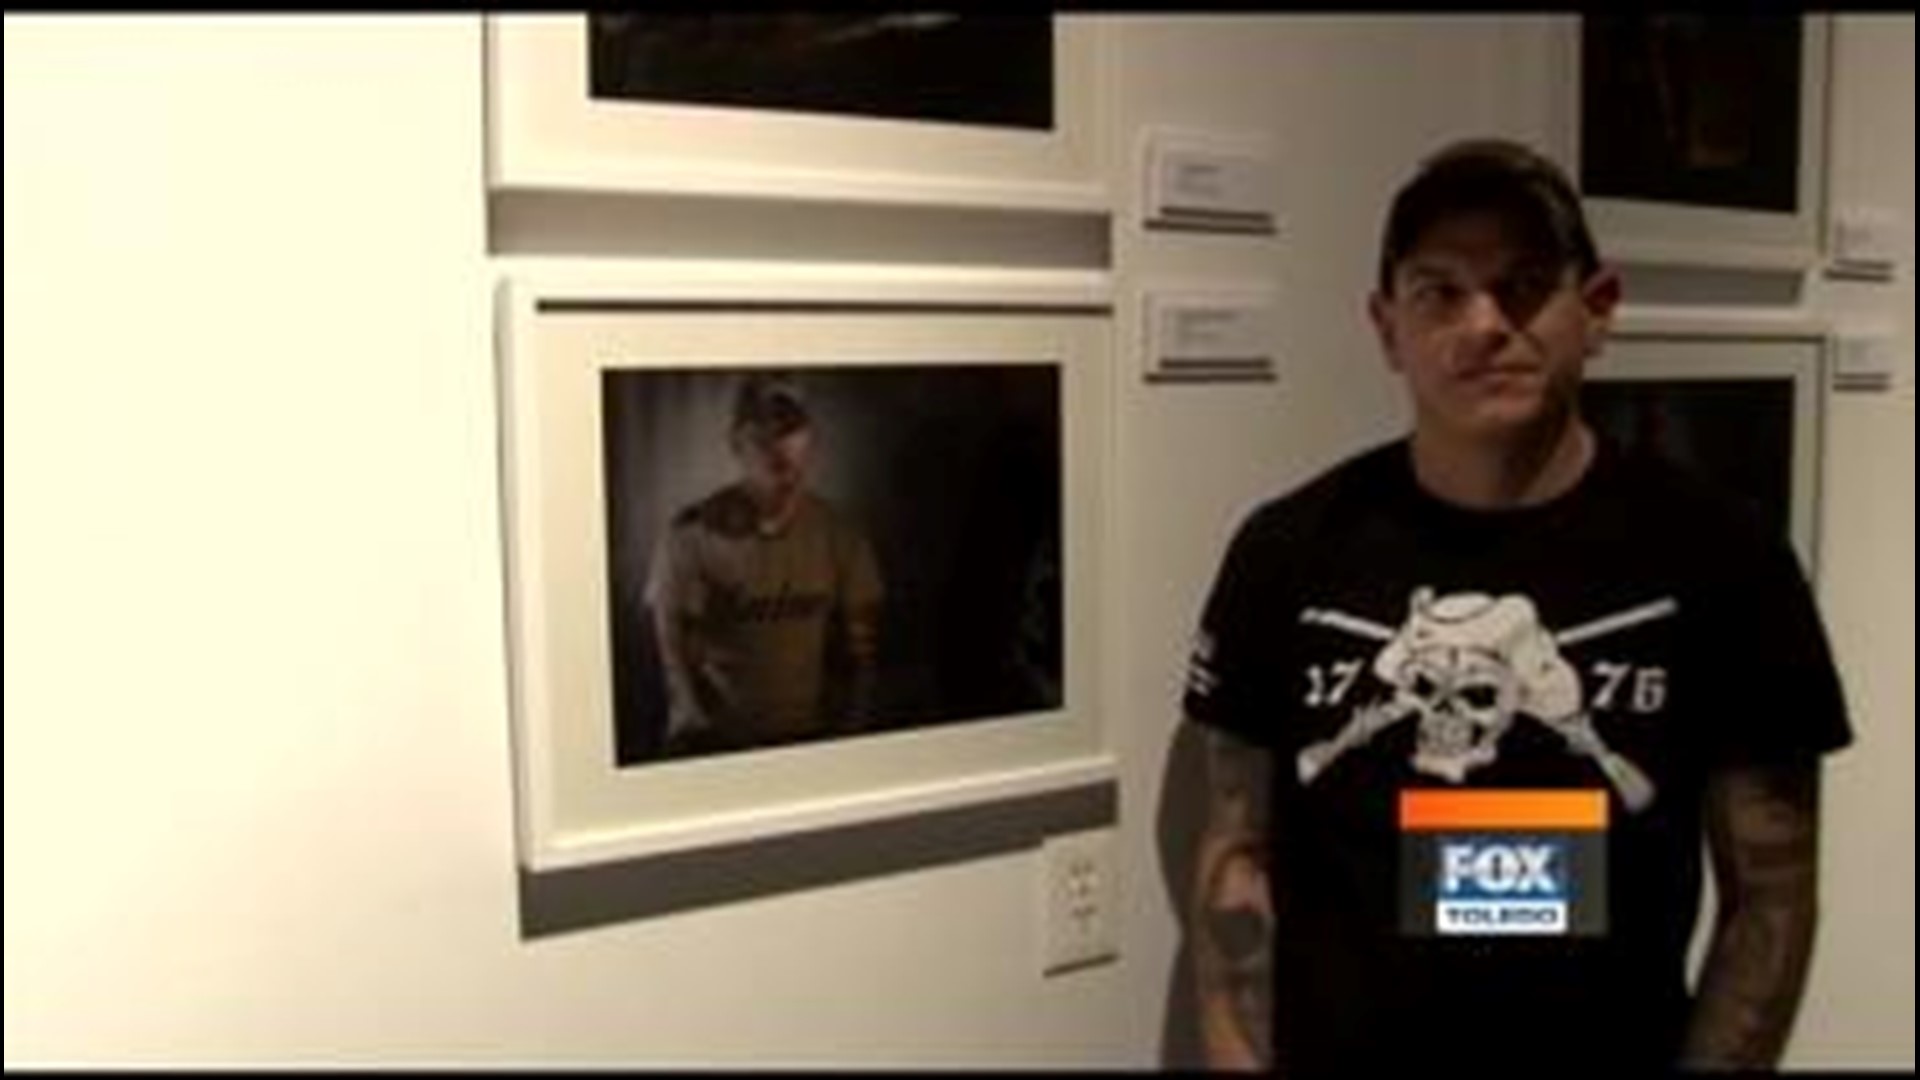 12 veterans honored with picture and video showcase Friday